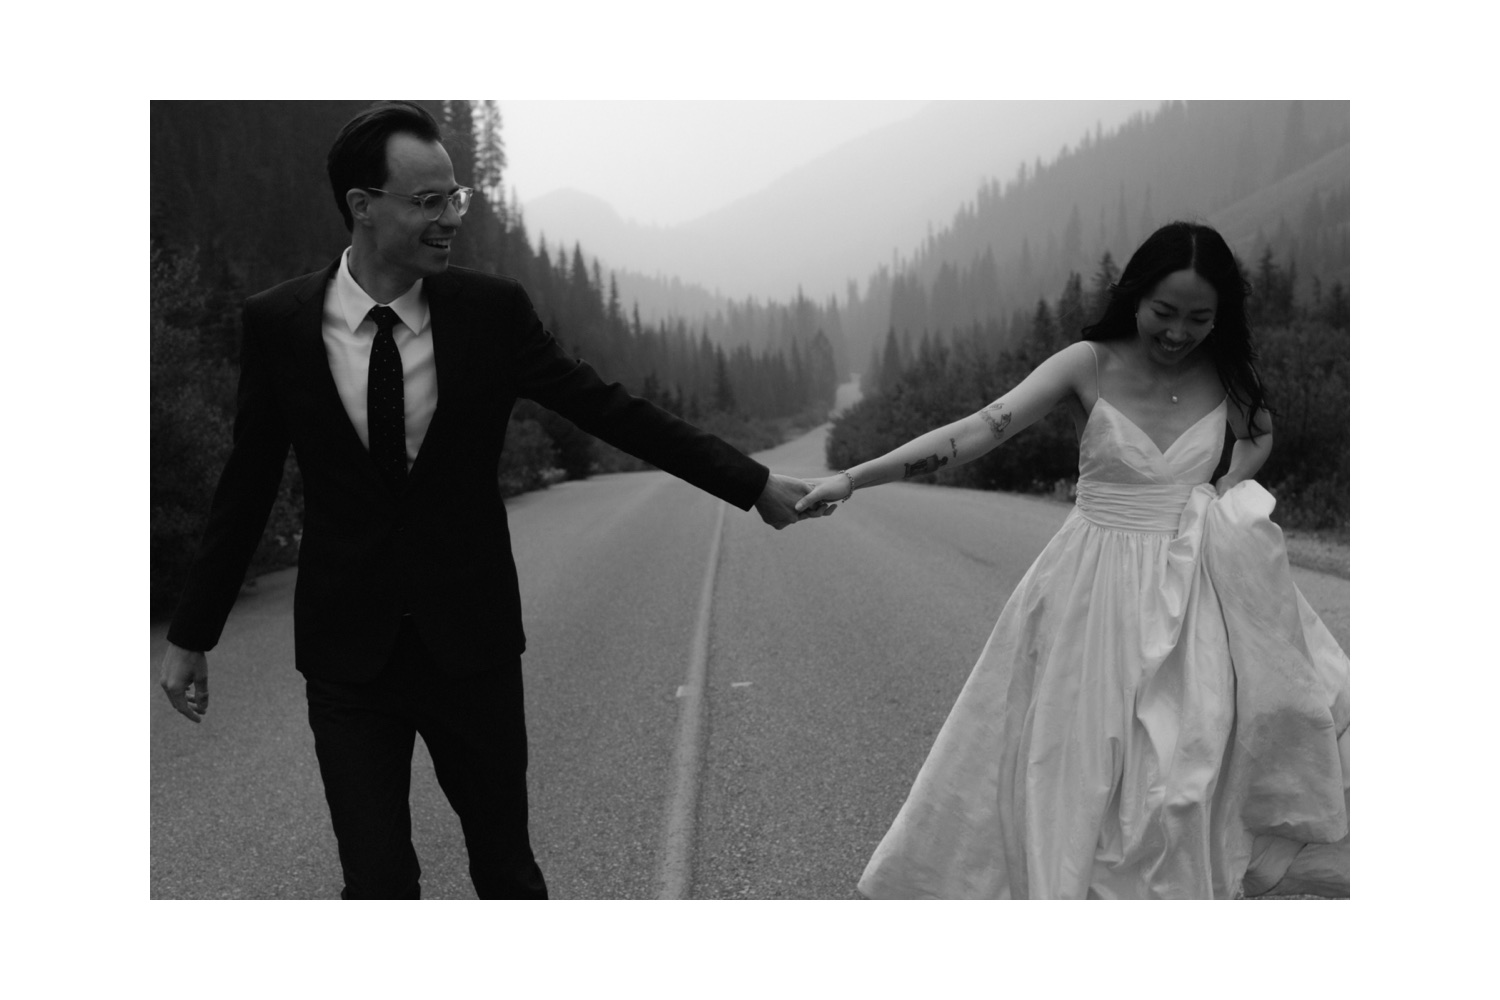 Moody mountain wedding portraiture in Canada with couple running hand in hand down the road